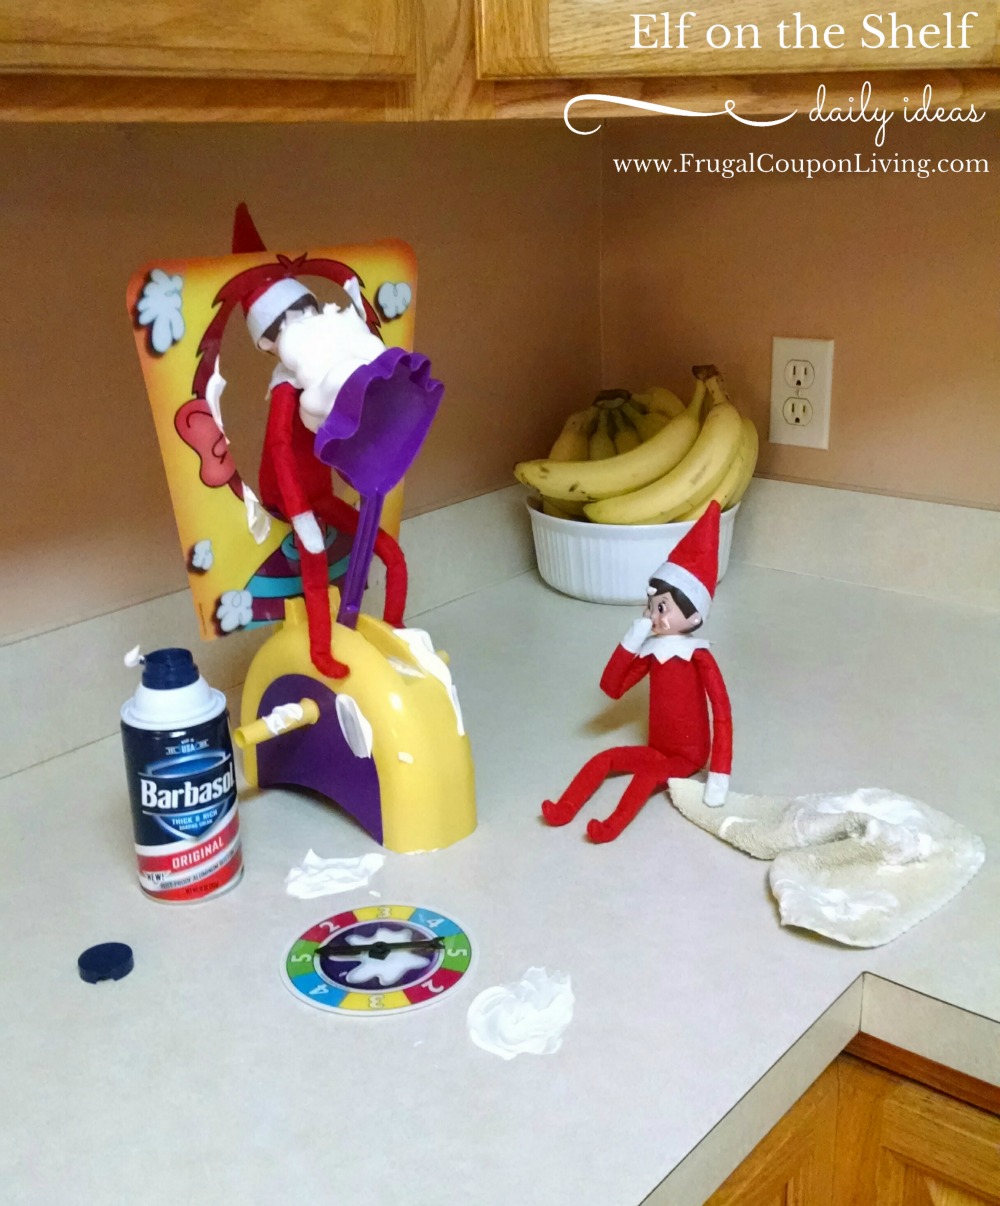 30 fun and unique Elf on the Shelf Ideas - Elf On the Shelf Pie Face Game